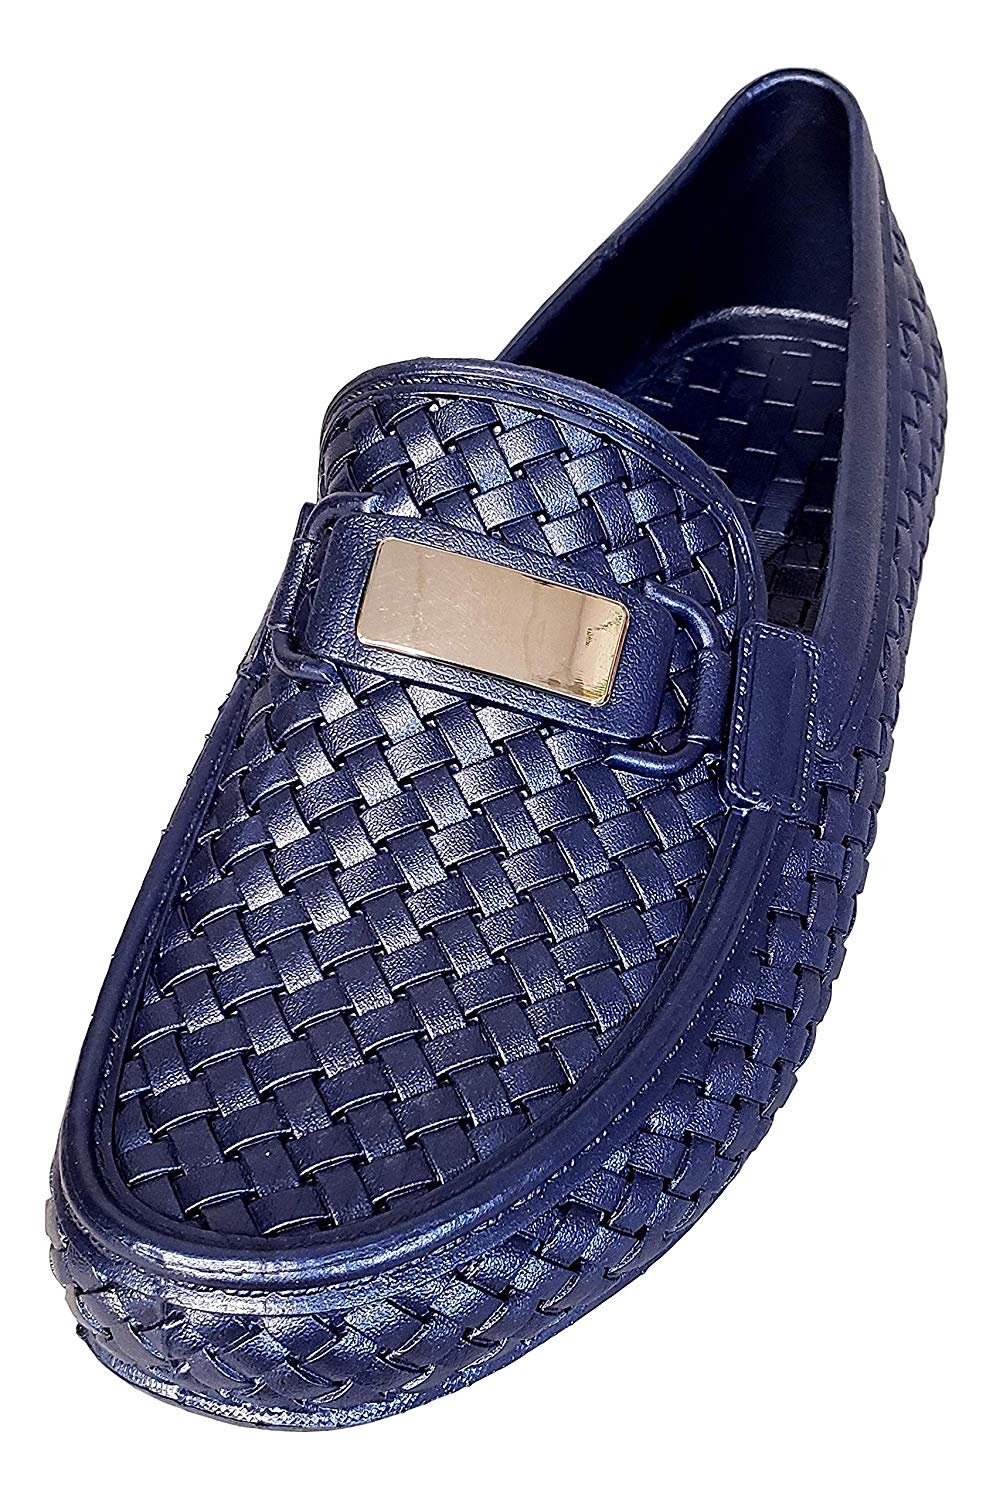 Mens Water Shoe Floater Loafers Classic Look Drivers 7 US M Mens, Blue - image 2 of 7